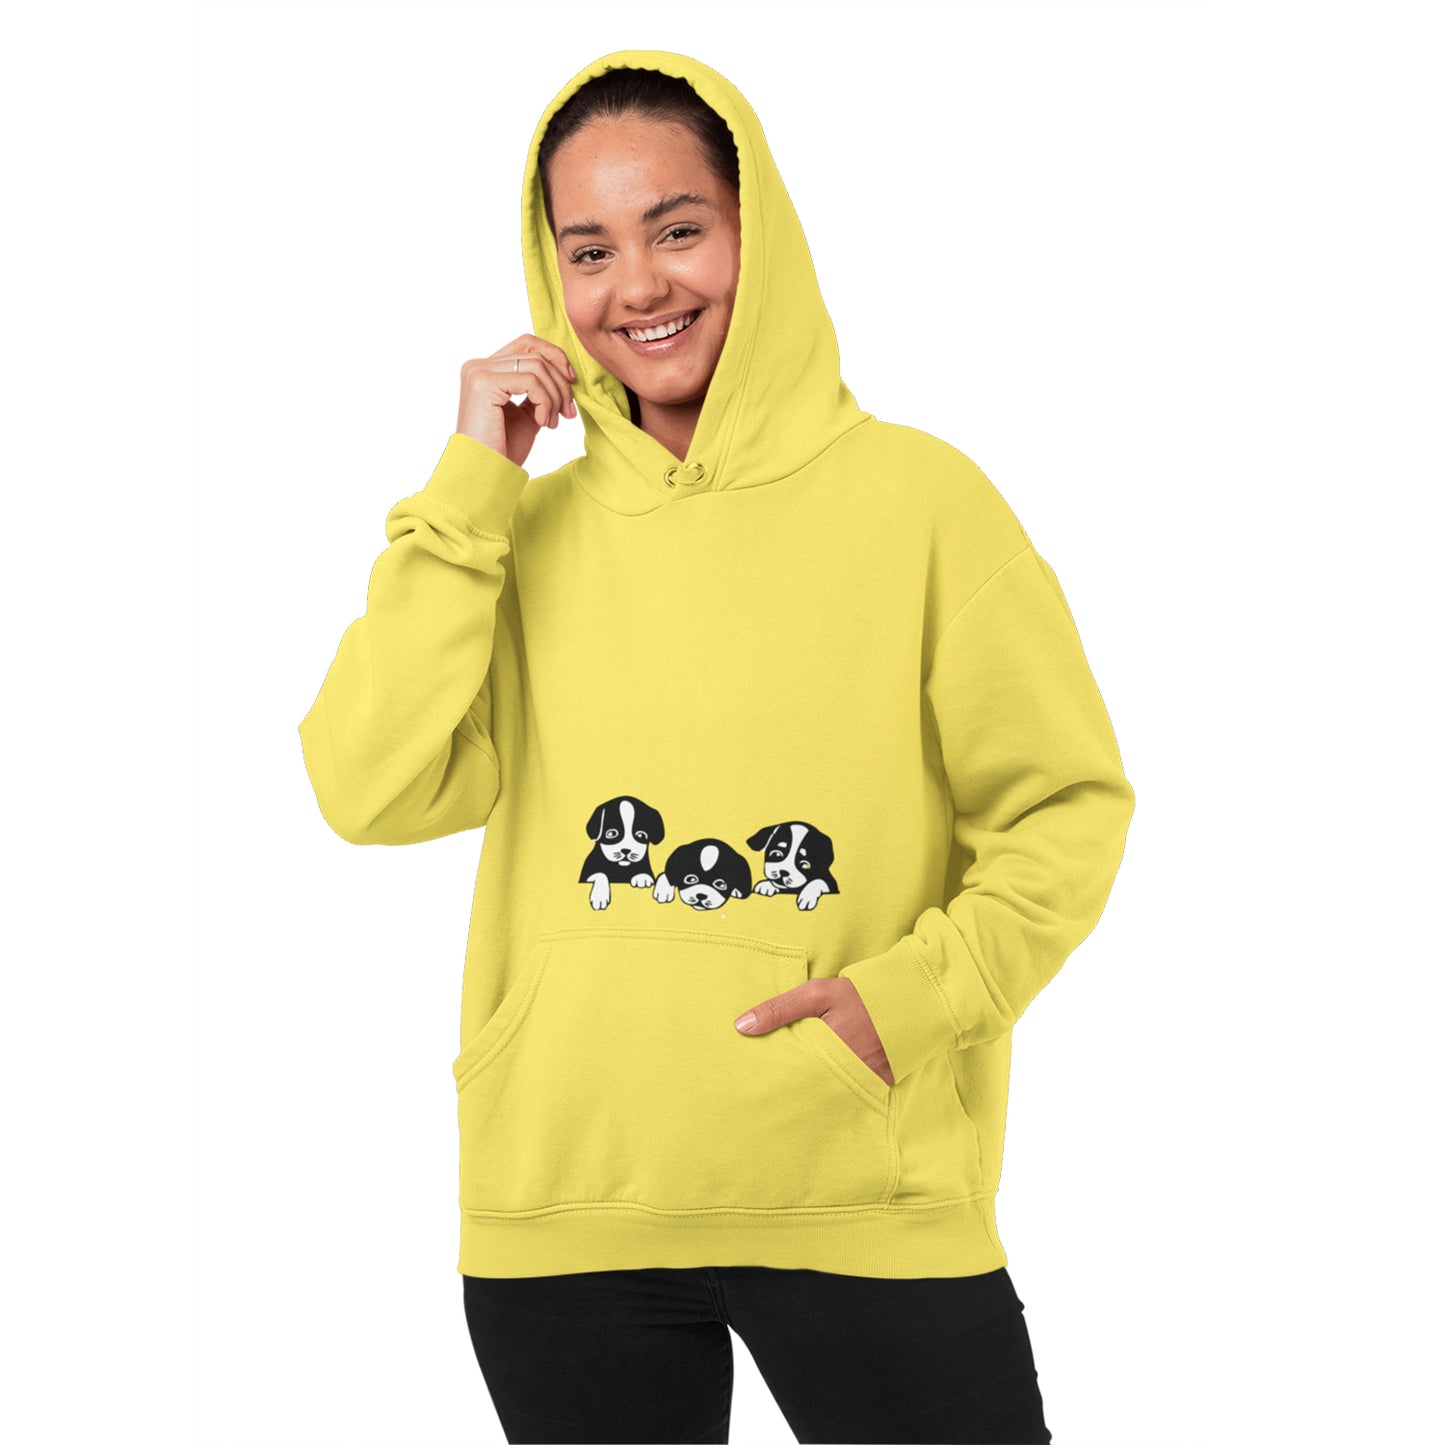 Neo Garments Women's Cotton Fashion Hooded Pullover Sweatshirt with Kangaroo Pockets | PUPPIES | SIZES - S - 36" TO 3XL - 46"